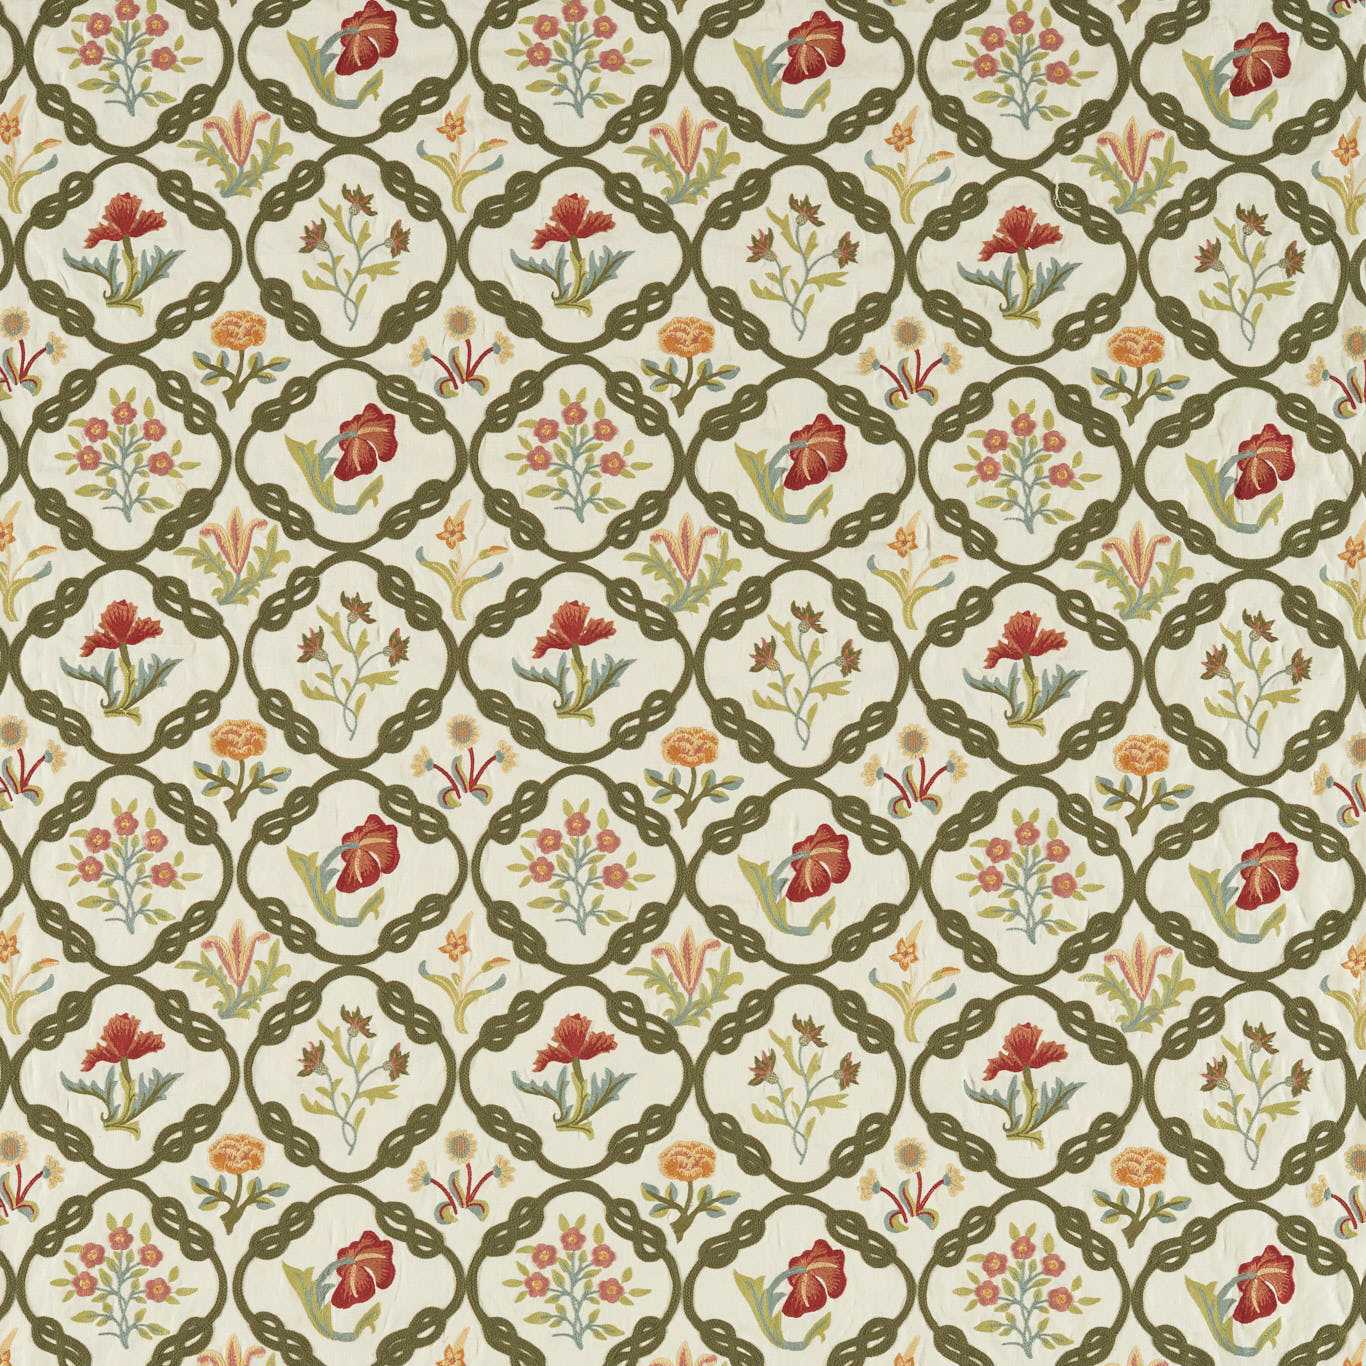 May’s Coverlet Twining Vine Fabric